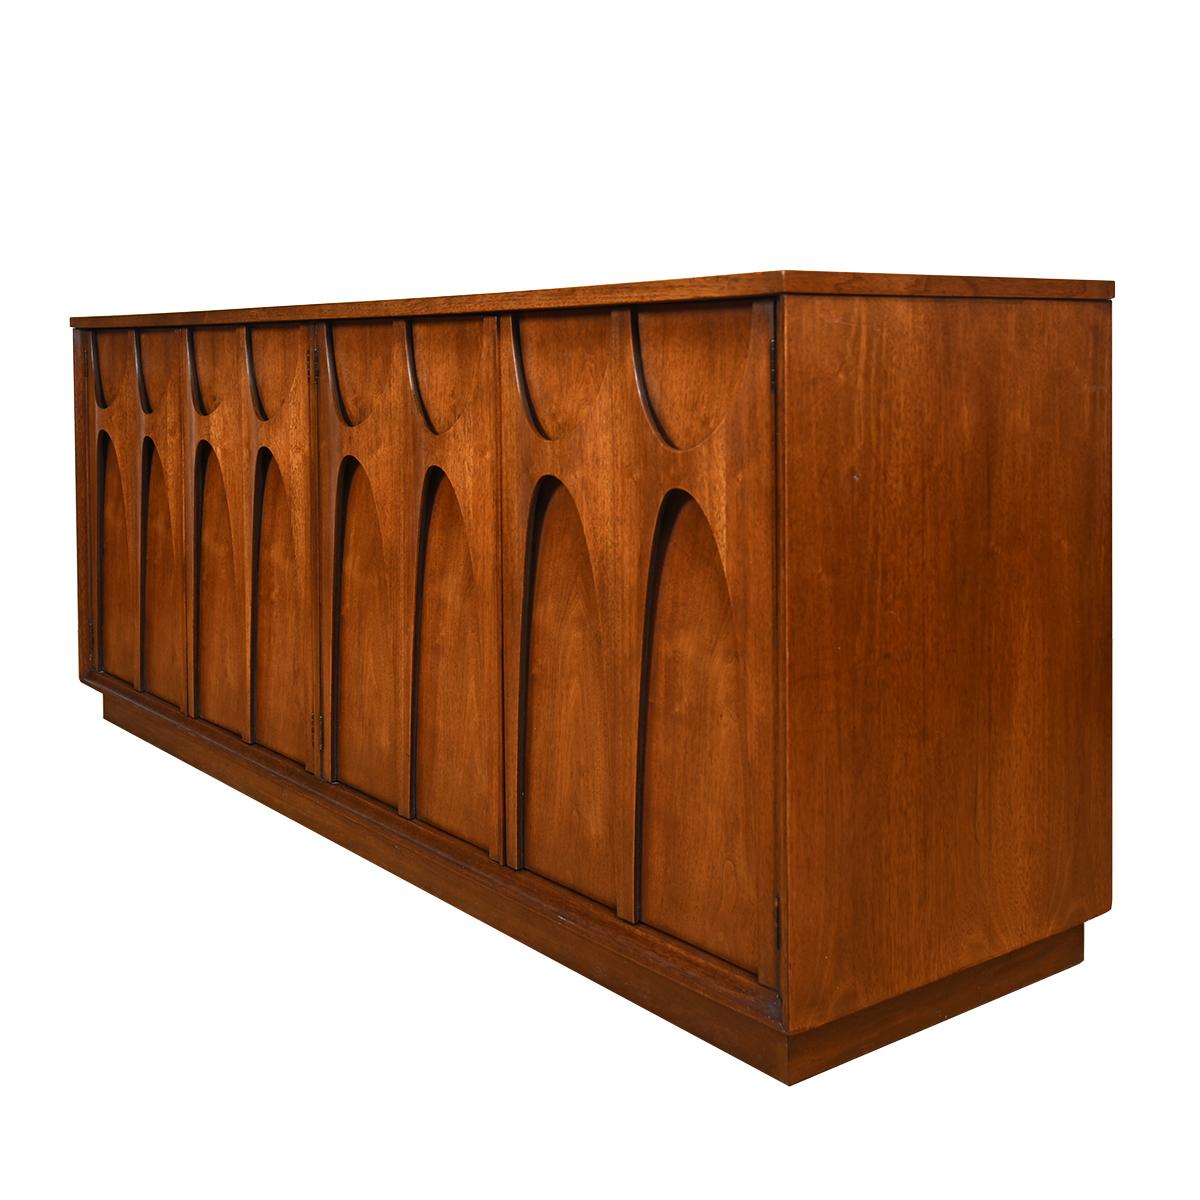 Coveted 4-Door Credenza Buffet in Walnut by Broyhill Brasilia In Excellent Condition In Kensington, MD